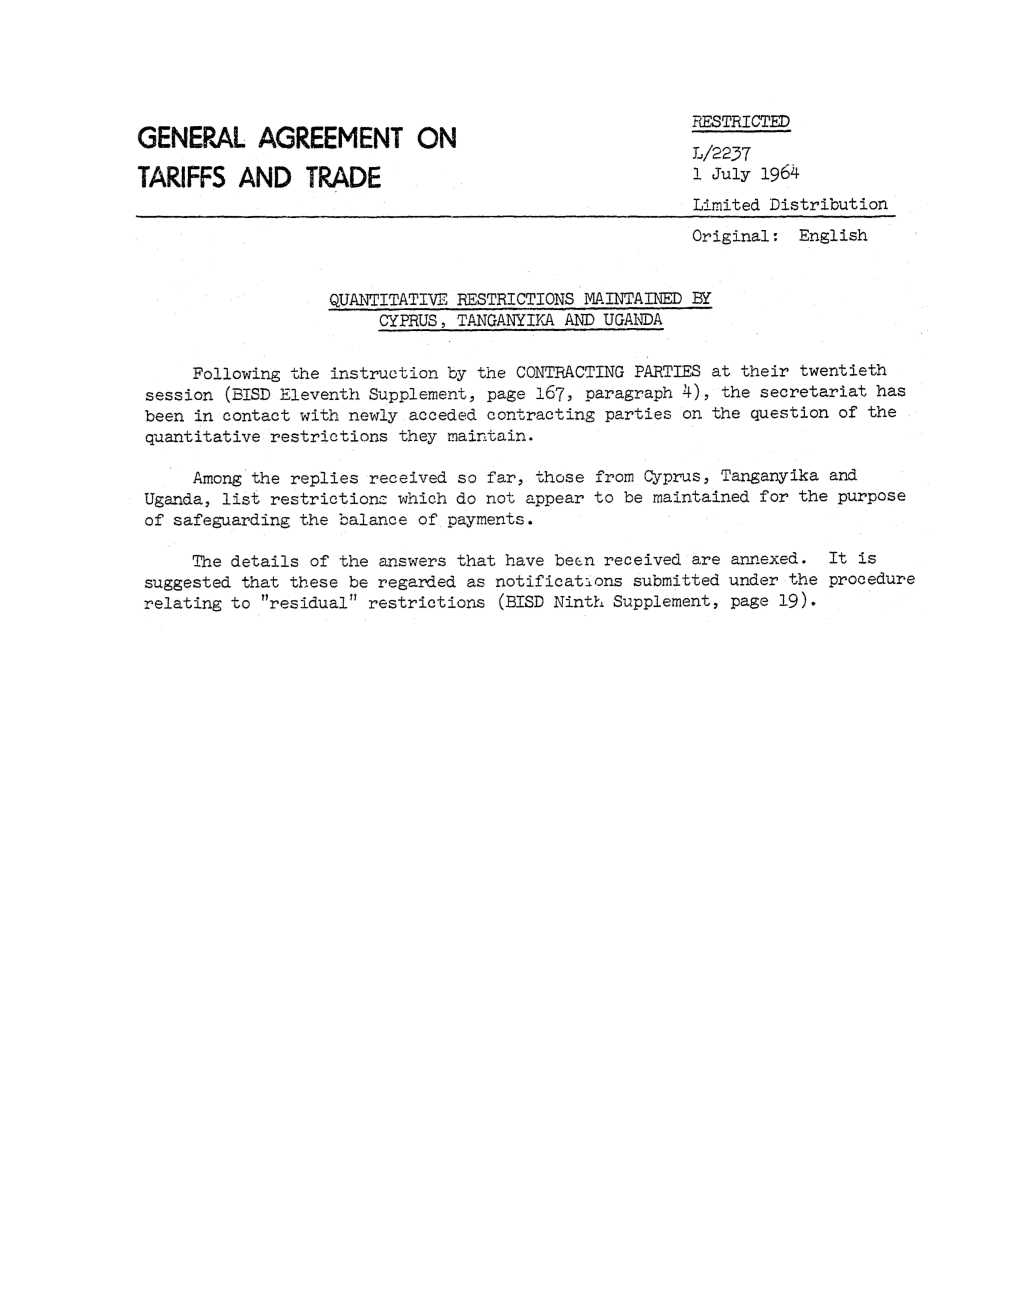 General Agreement on Tariffs and Trade